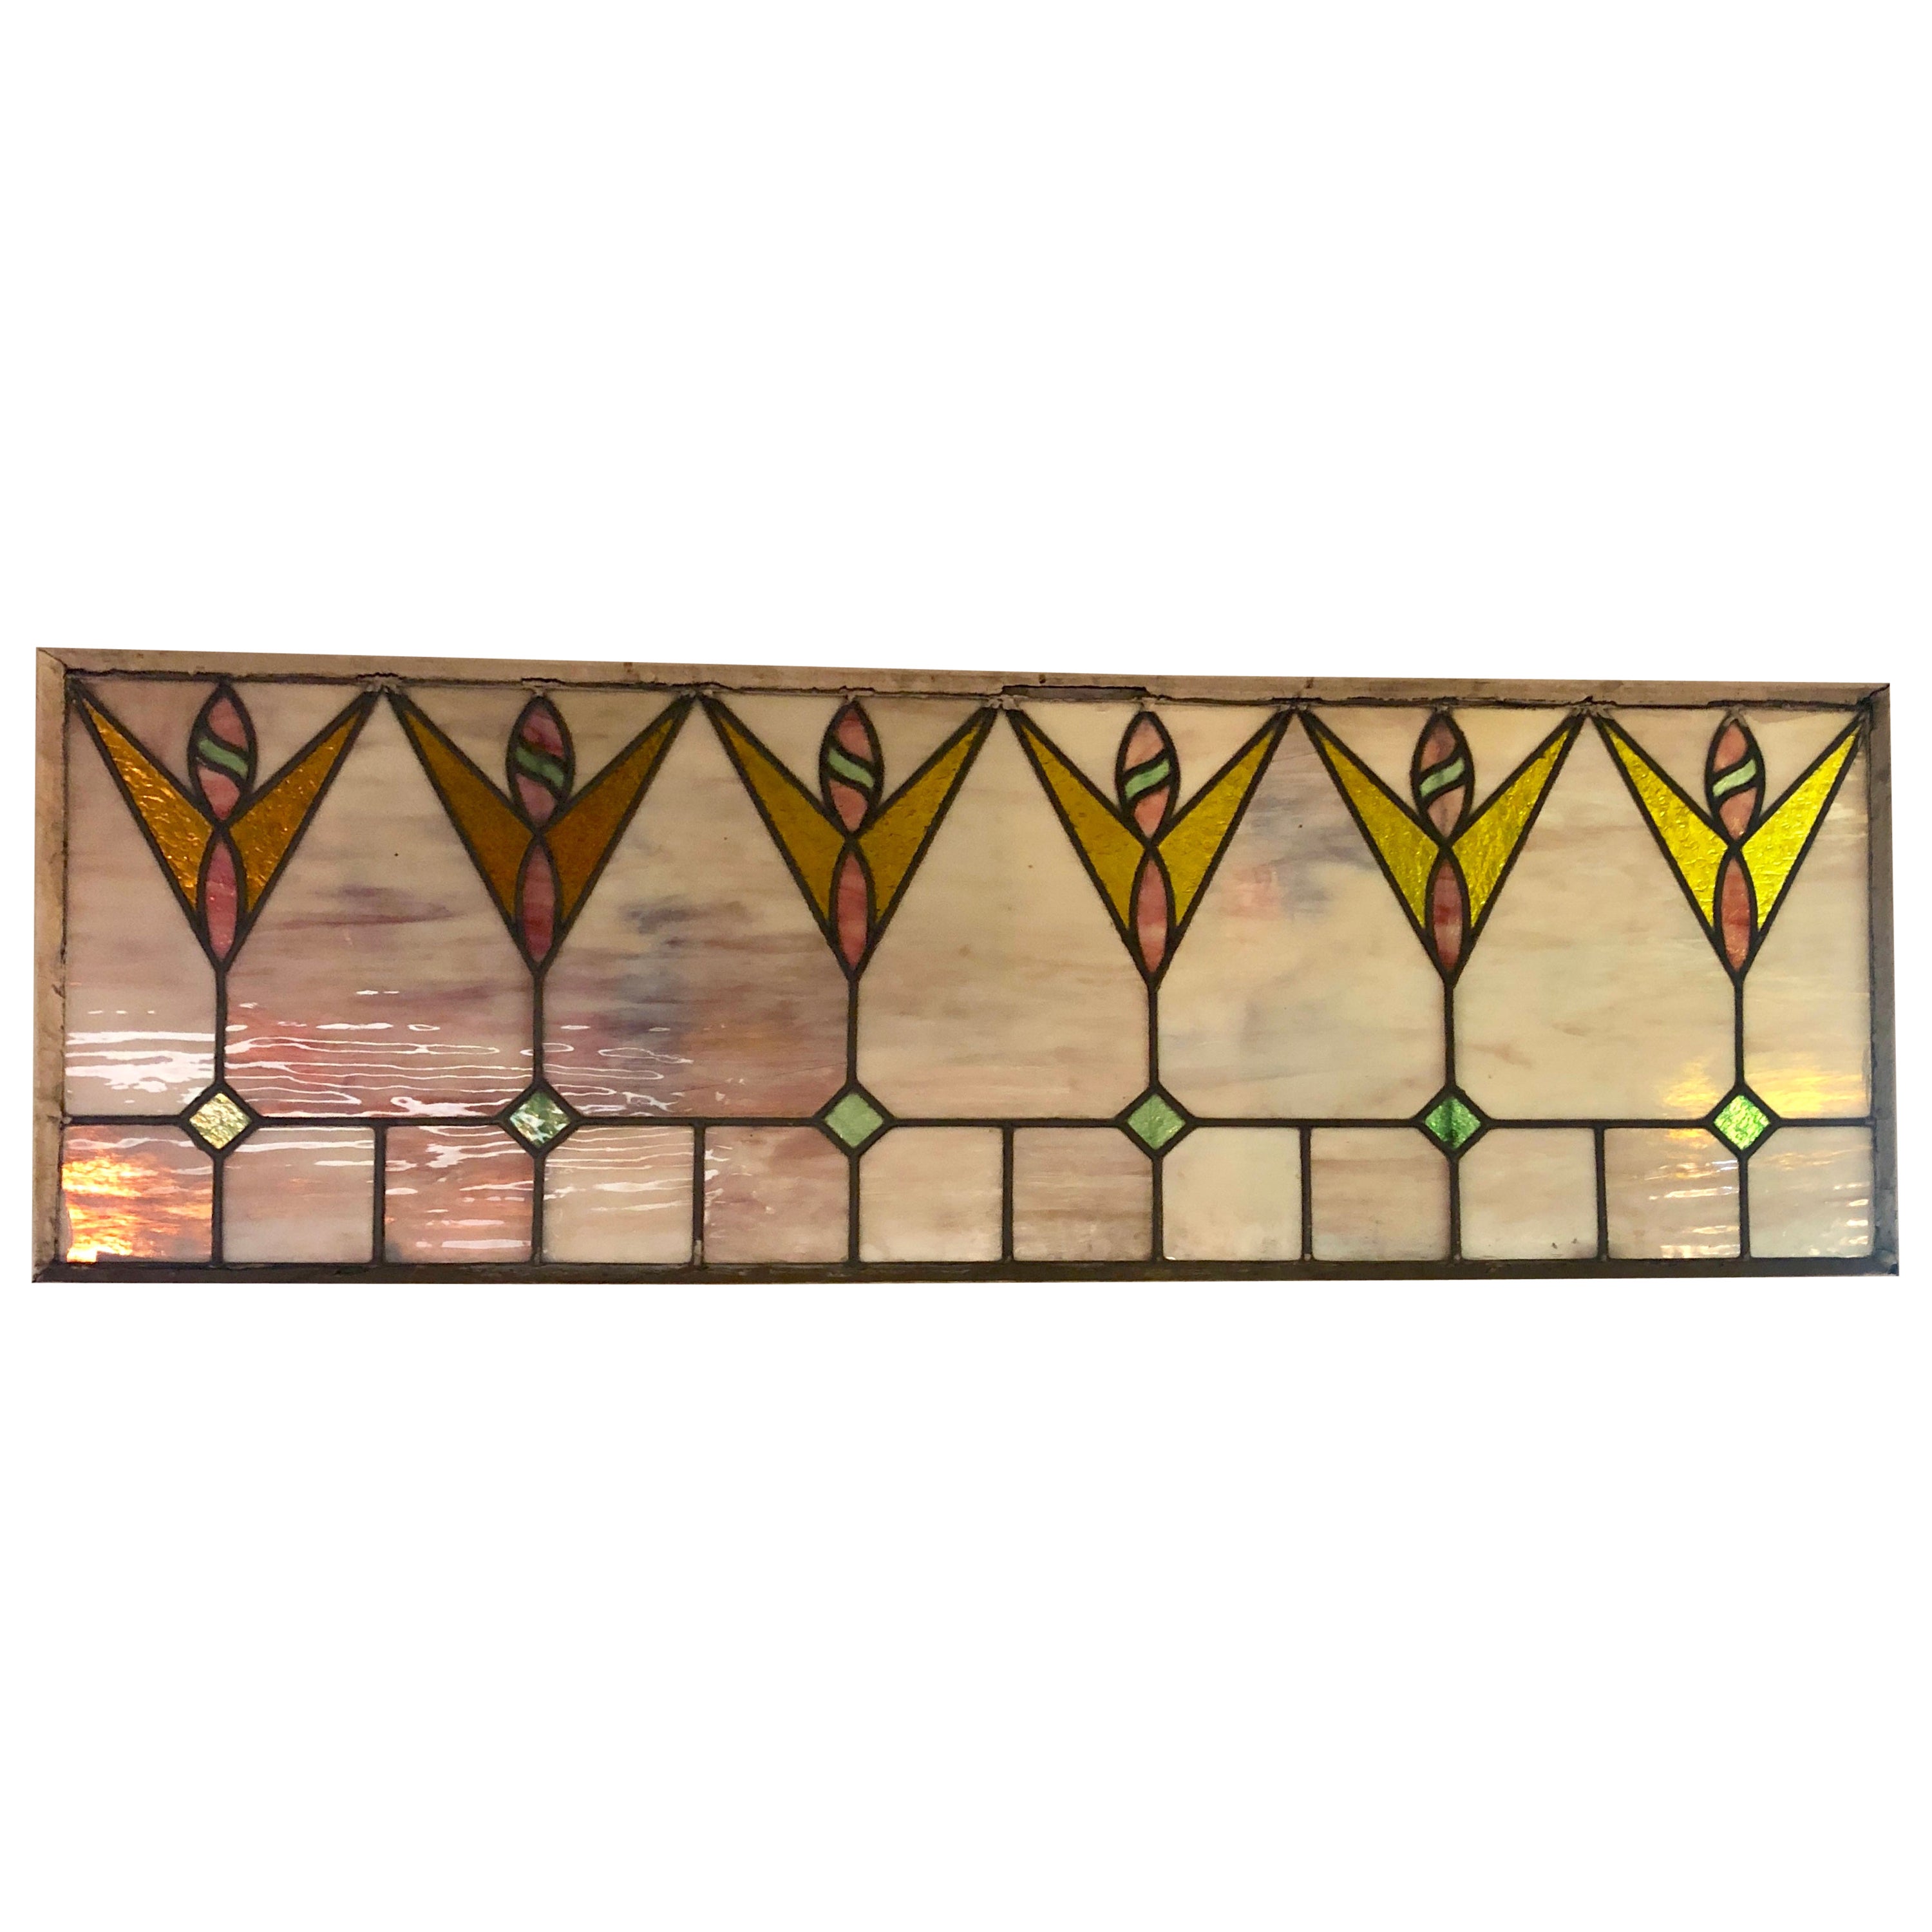 Stained Glass Transom Window 52"x19" For Sale